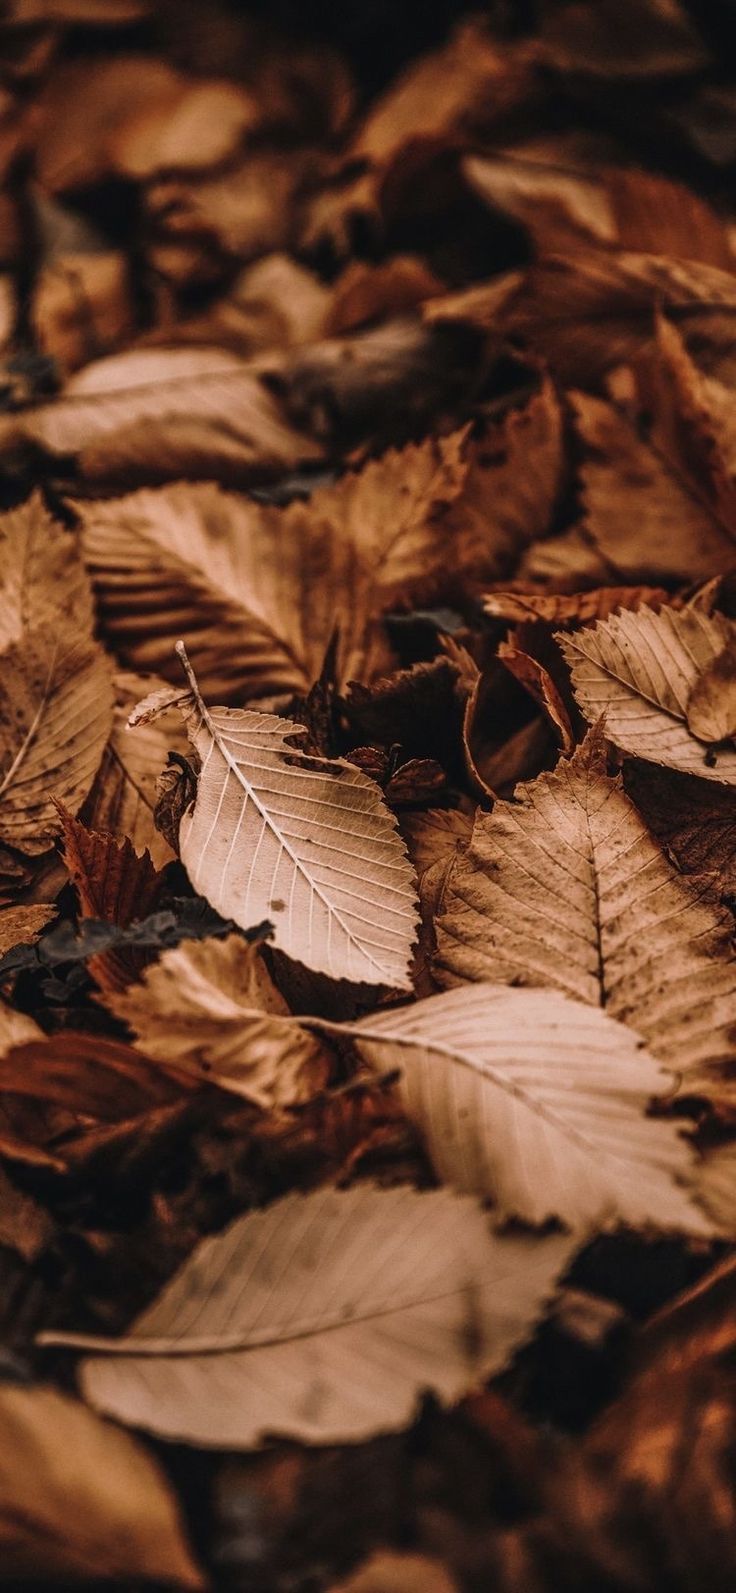 Into the Woods. Leaves wallpaper iphone, Cool wallpaper for phones, Autumn leaves wallpaper